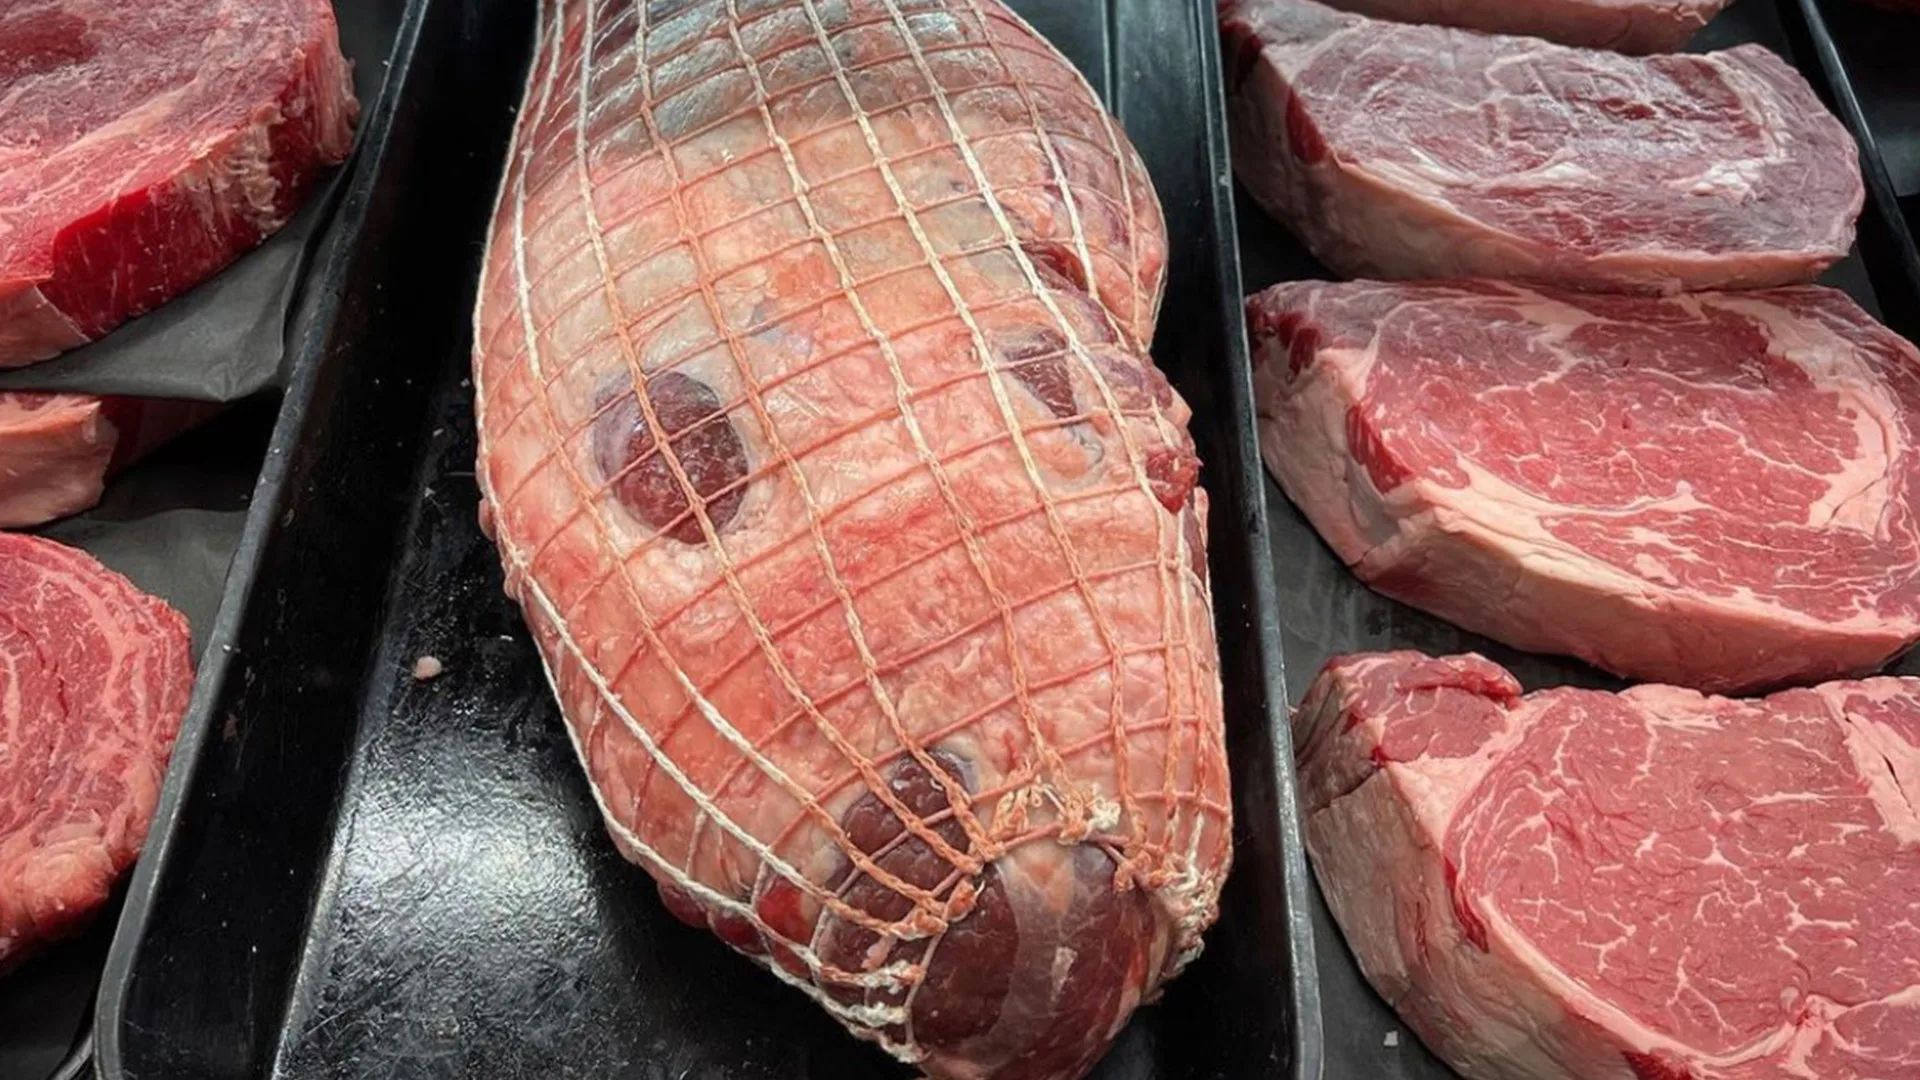 leg of lamb out on display